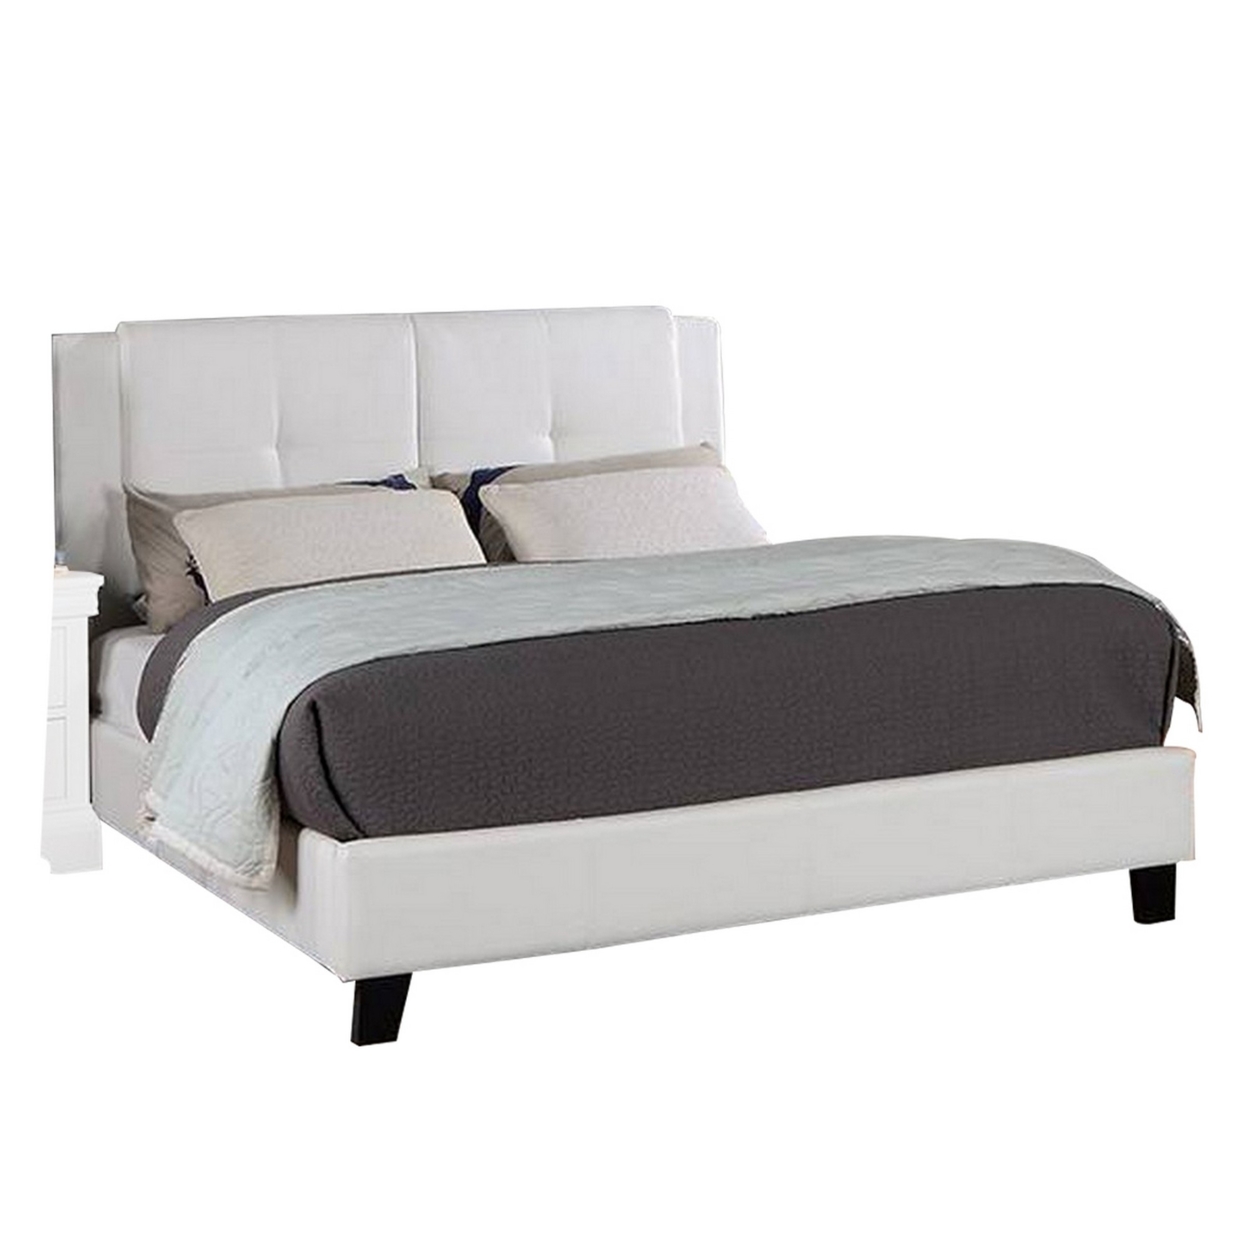 Amy Queen Size Platform Bed, Vegan Faux Leather Upholstery, White- Saltoro Sherpi